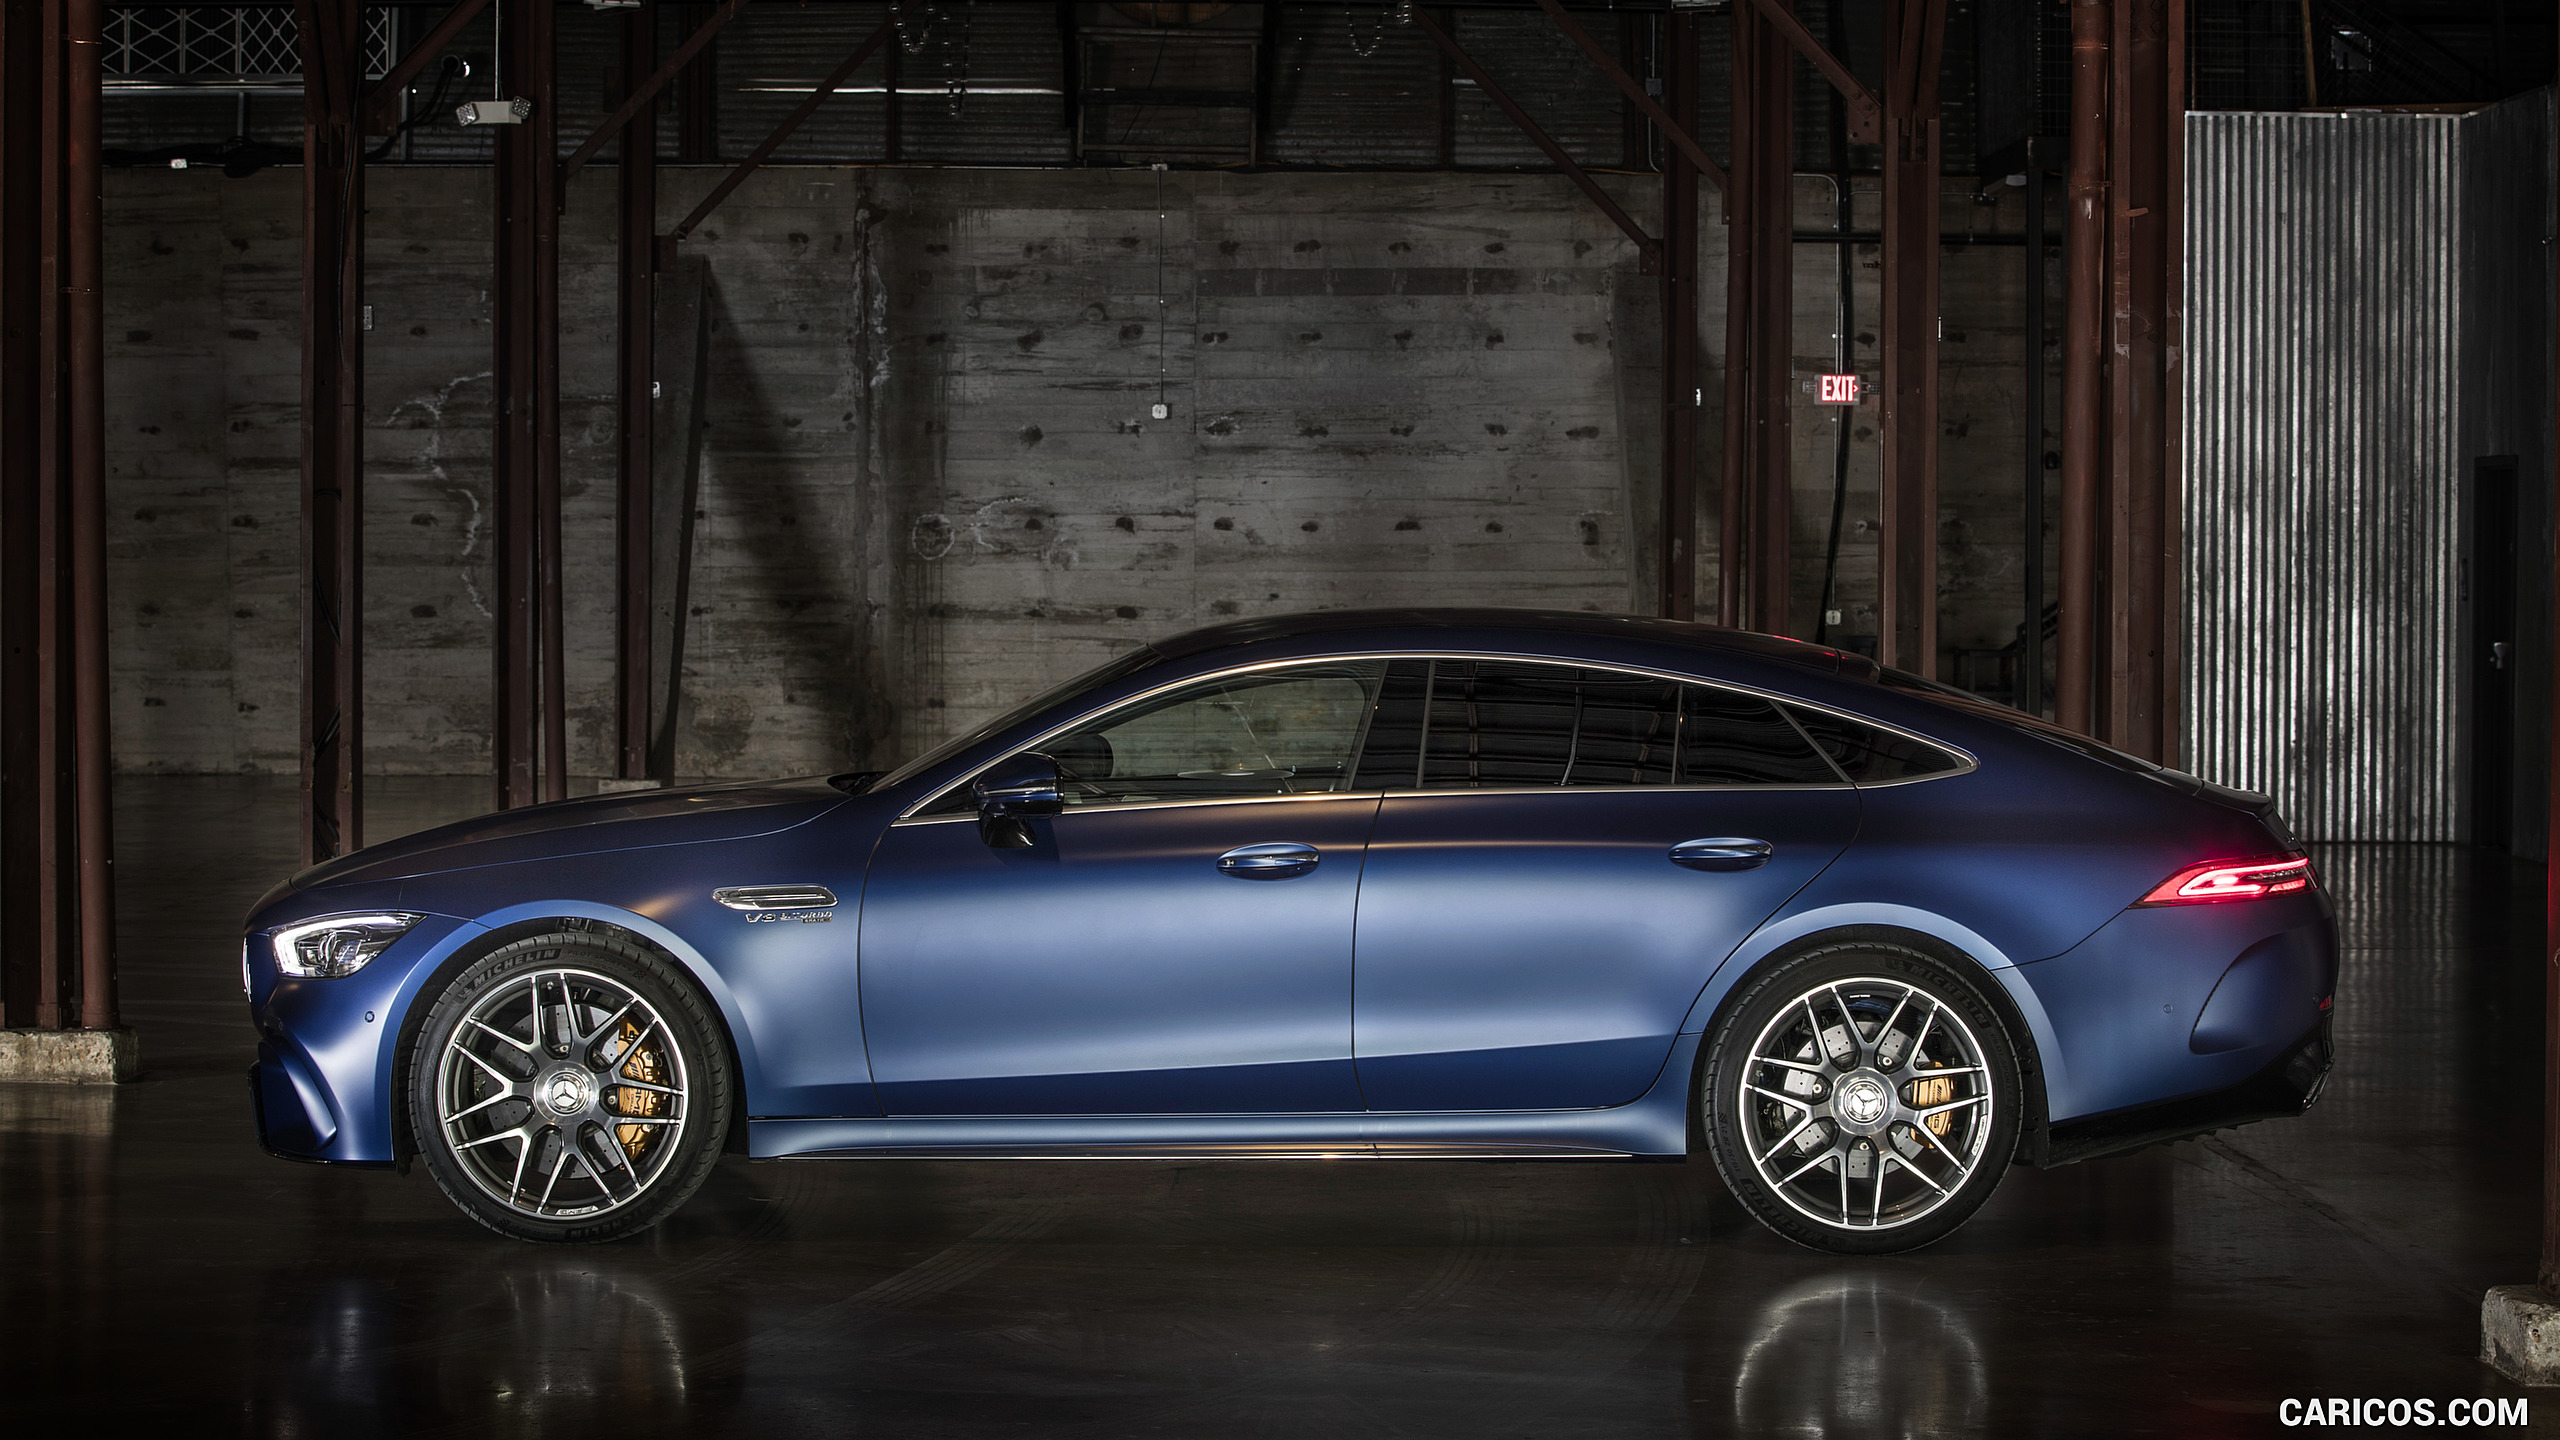 2019 Mercedes-AMG GT 63 S 4MATIC+ 4-Door Coupe - Side, #144 of 427